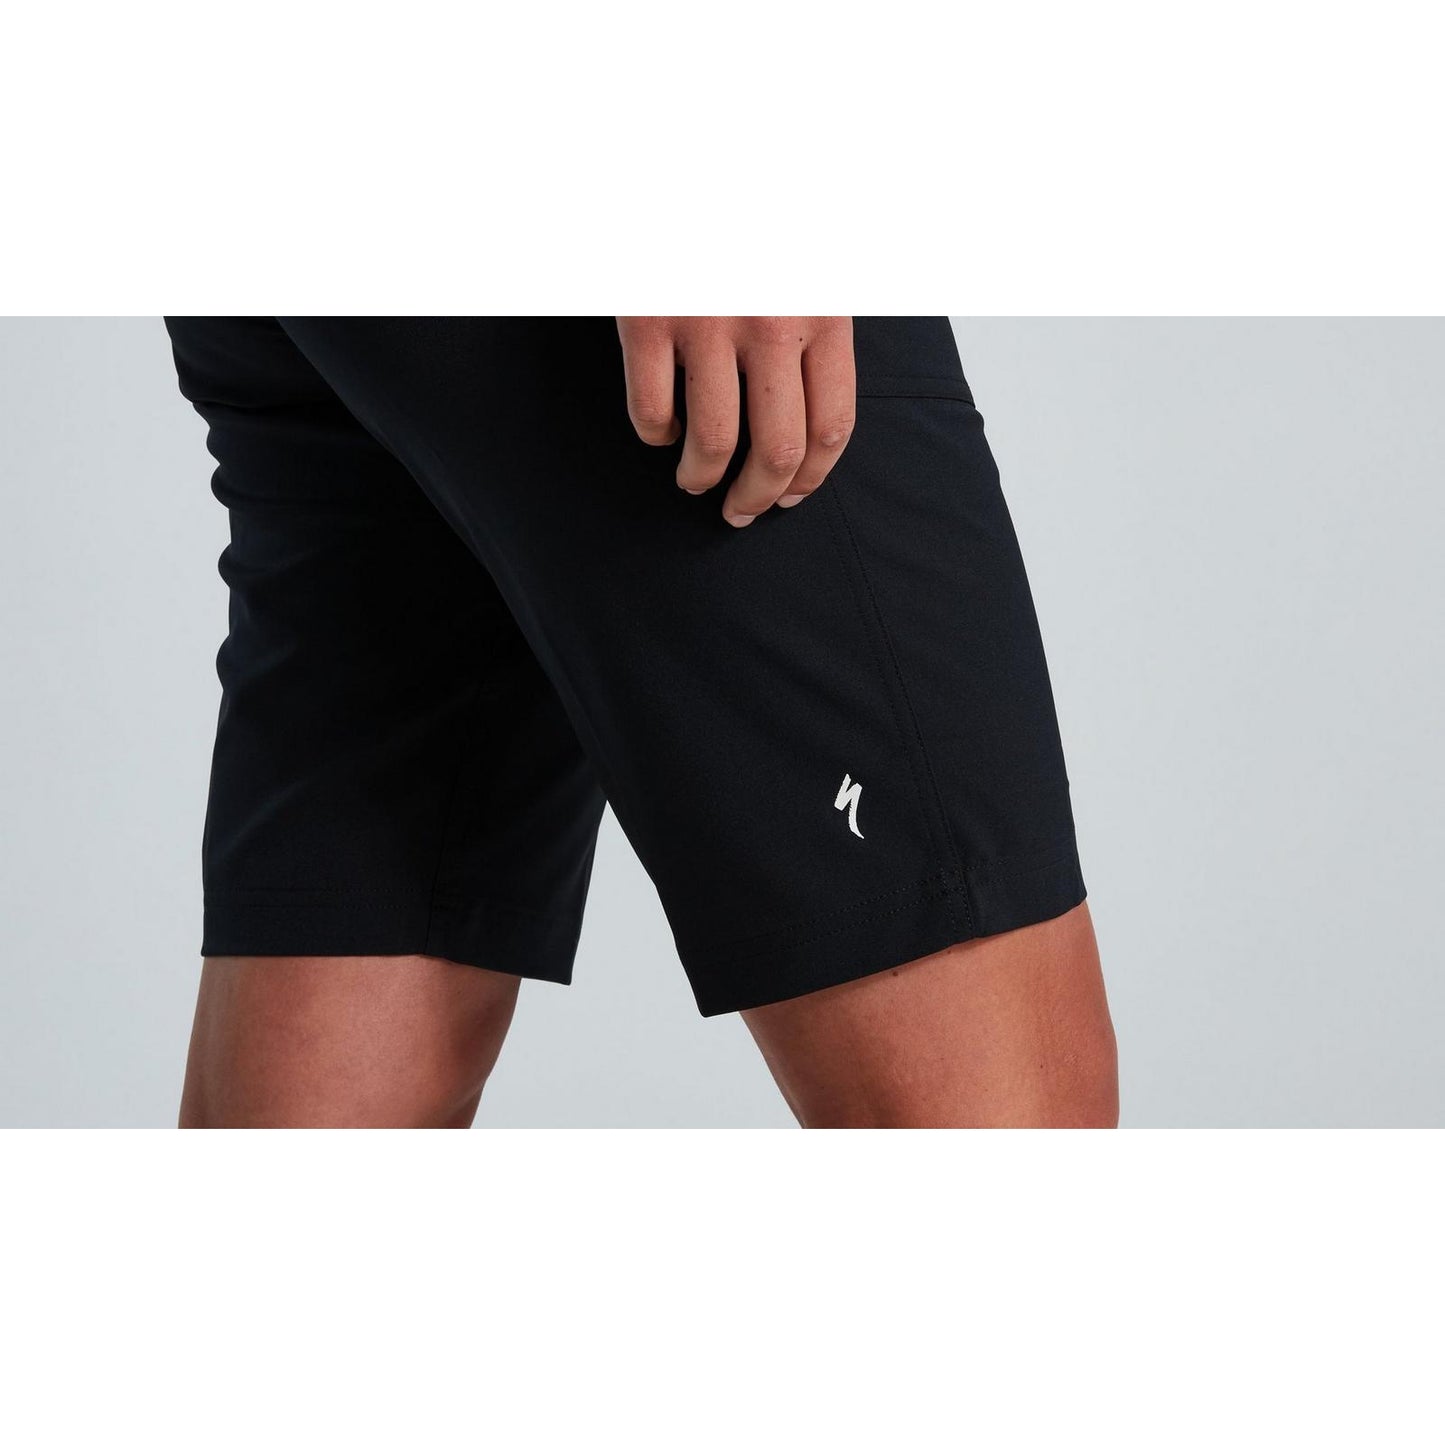 Specialized Women's Trail Shorts - Shorts - Bicycle Warehouse